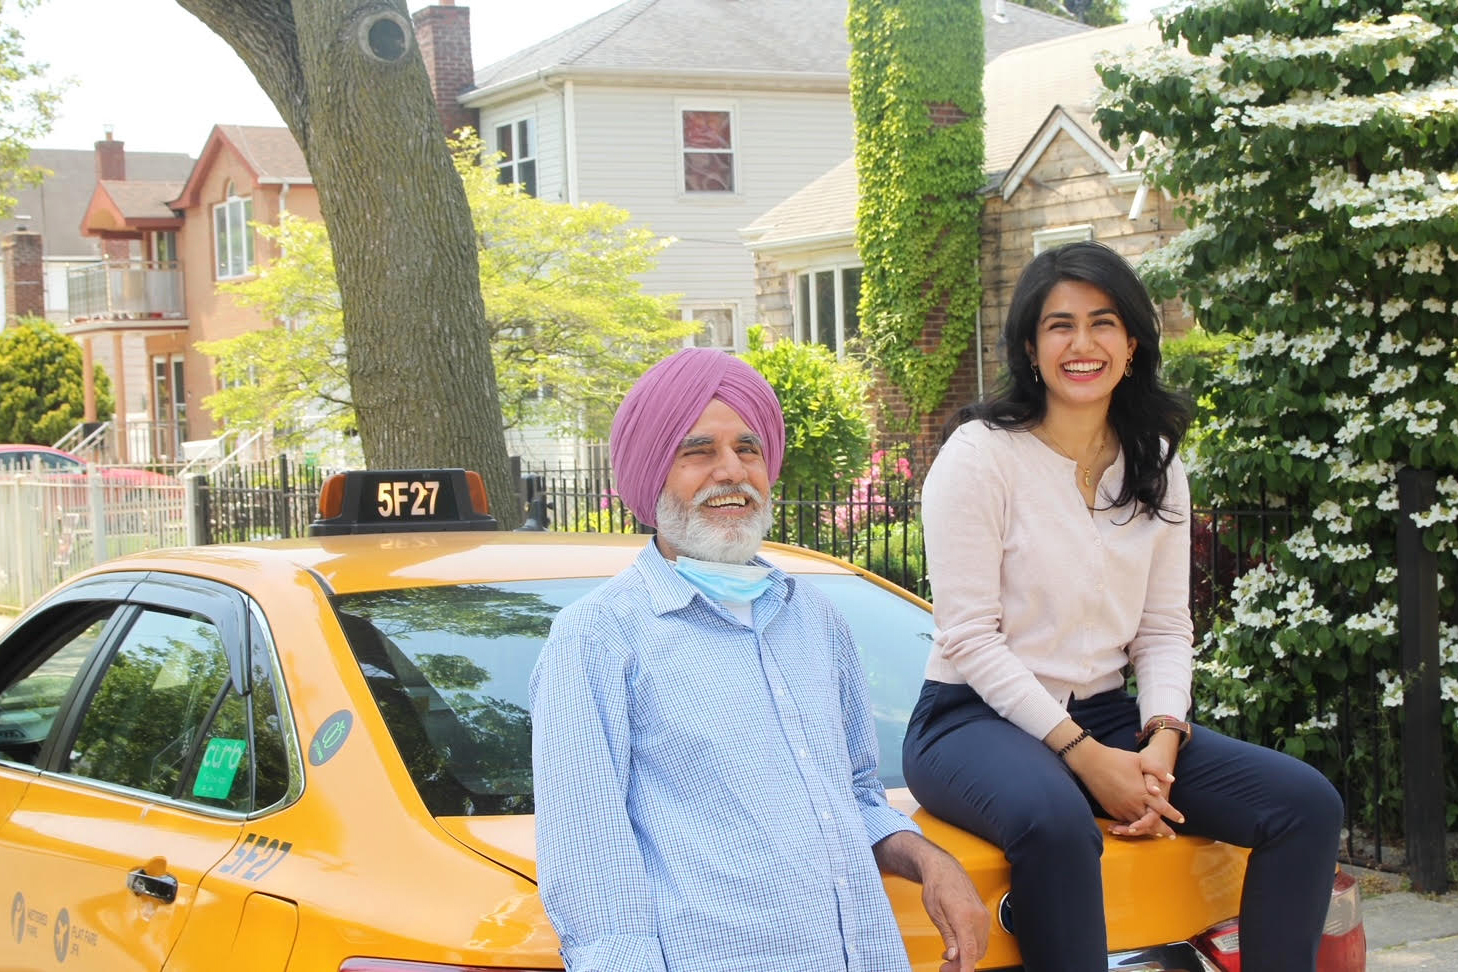 A photo of a man leaning on the back of a yellow cab, standing next to a woman, who is seated on the back of the cab